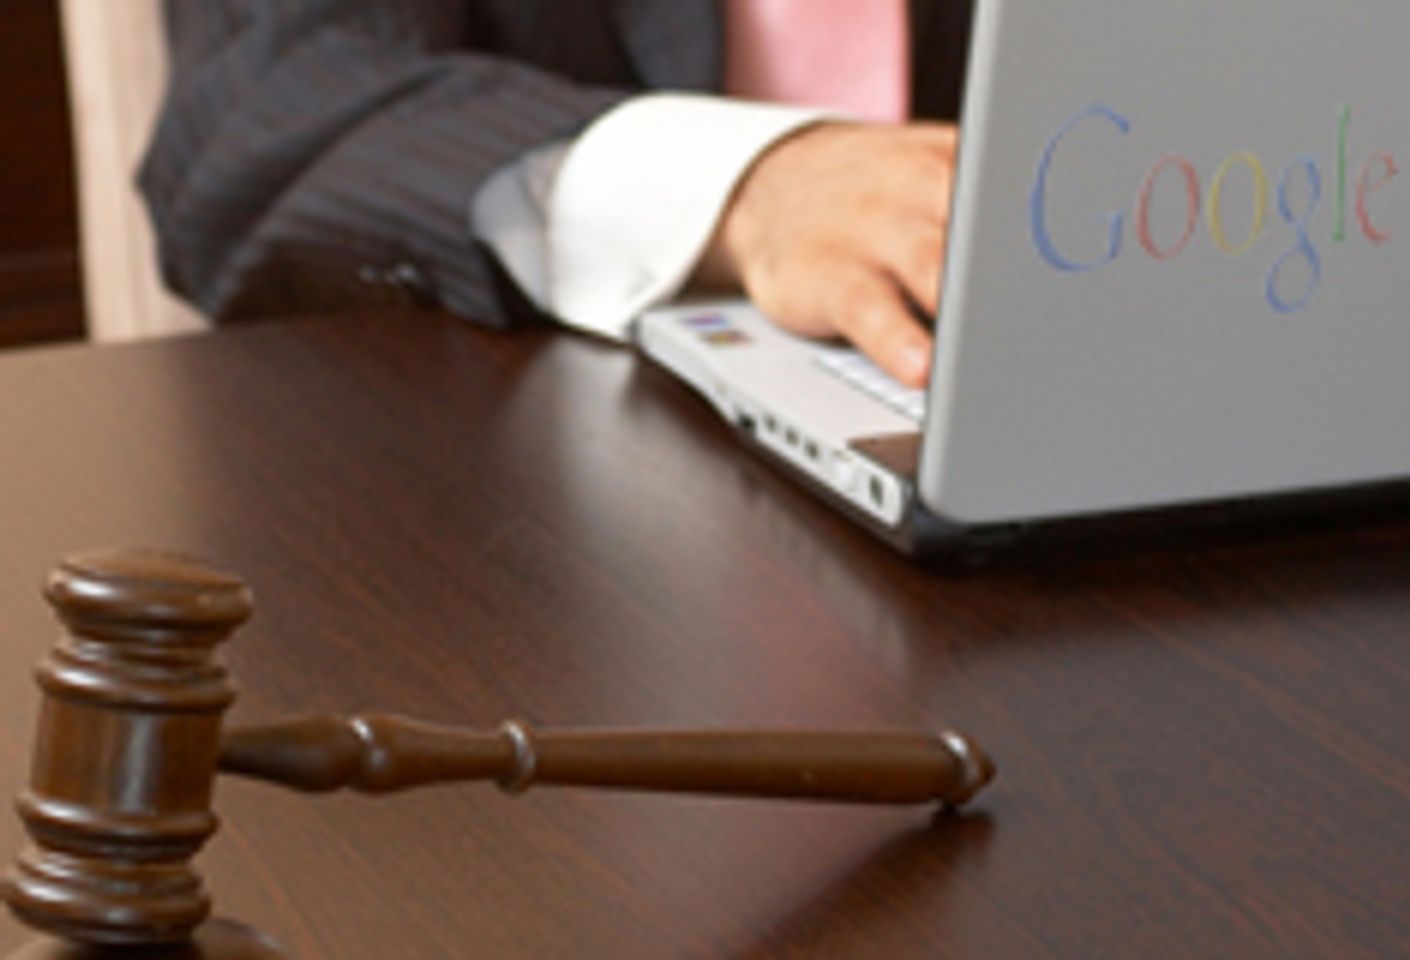 Group Sues Justice Department for Google Contacts